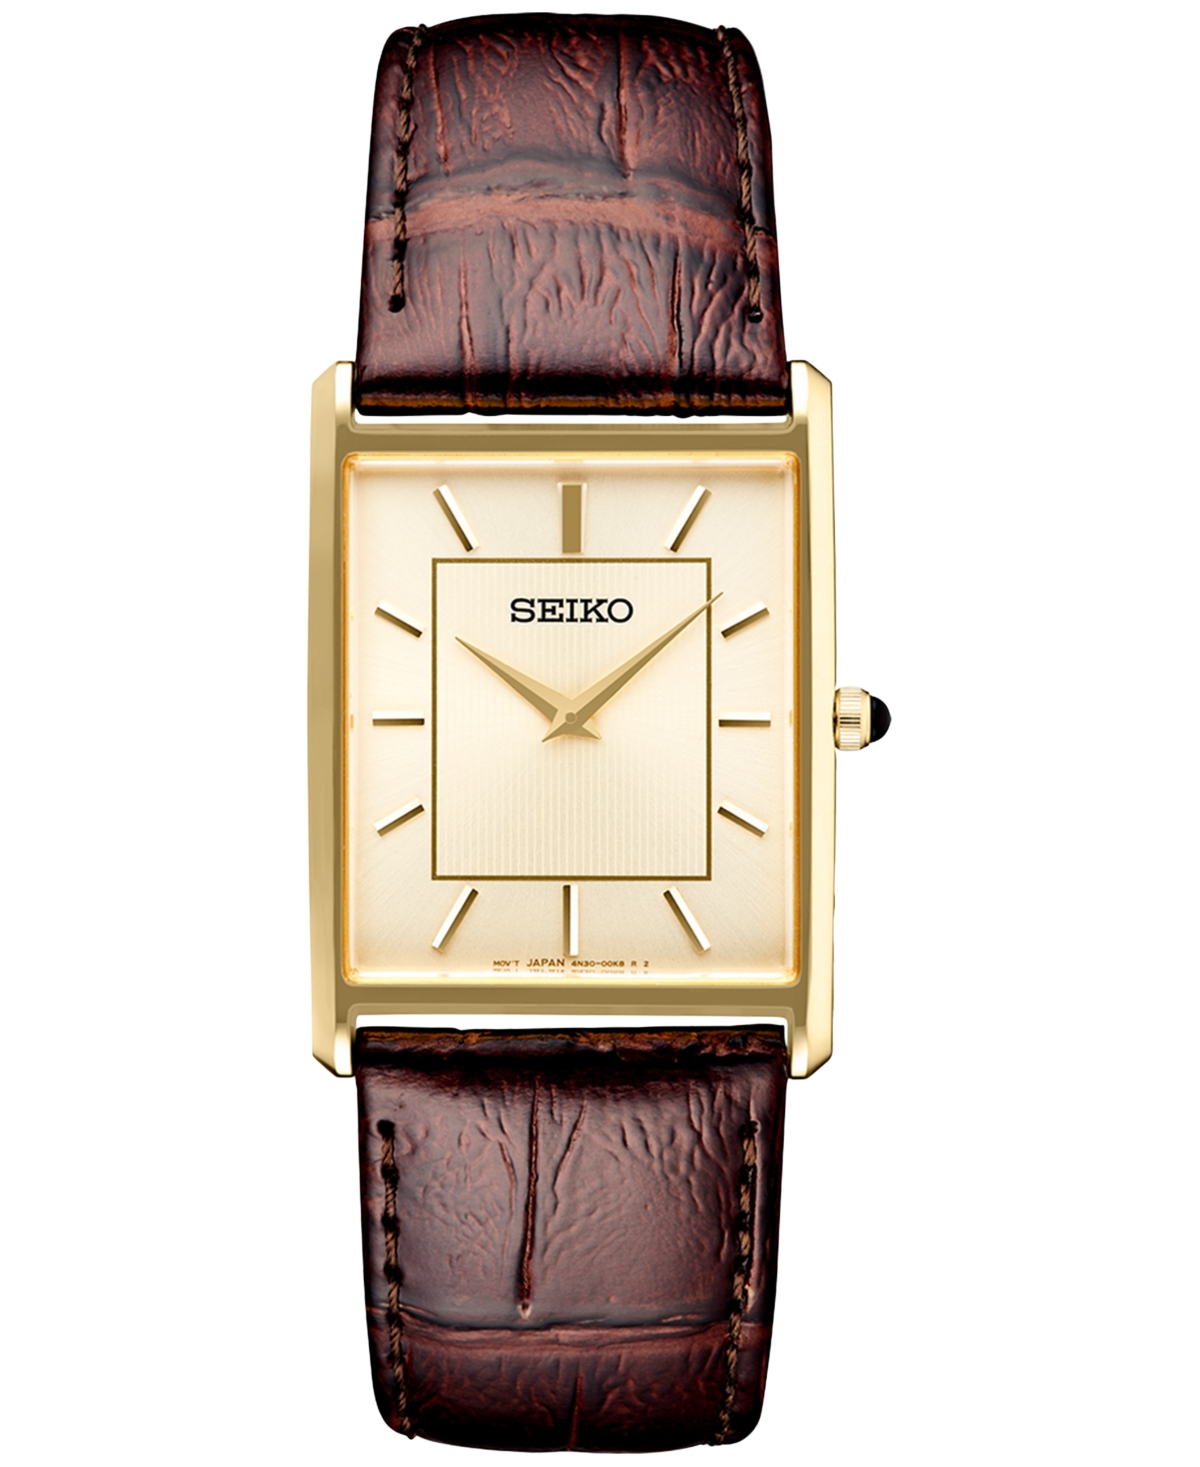 Seiko Men's Essentials Brown Leather Strap Watch 29mm & Reviews - All  Watches - Jewelry & Watches - Macy's